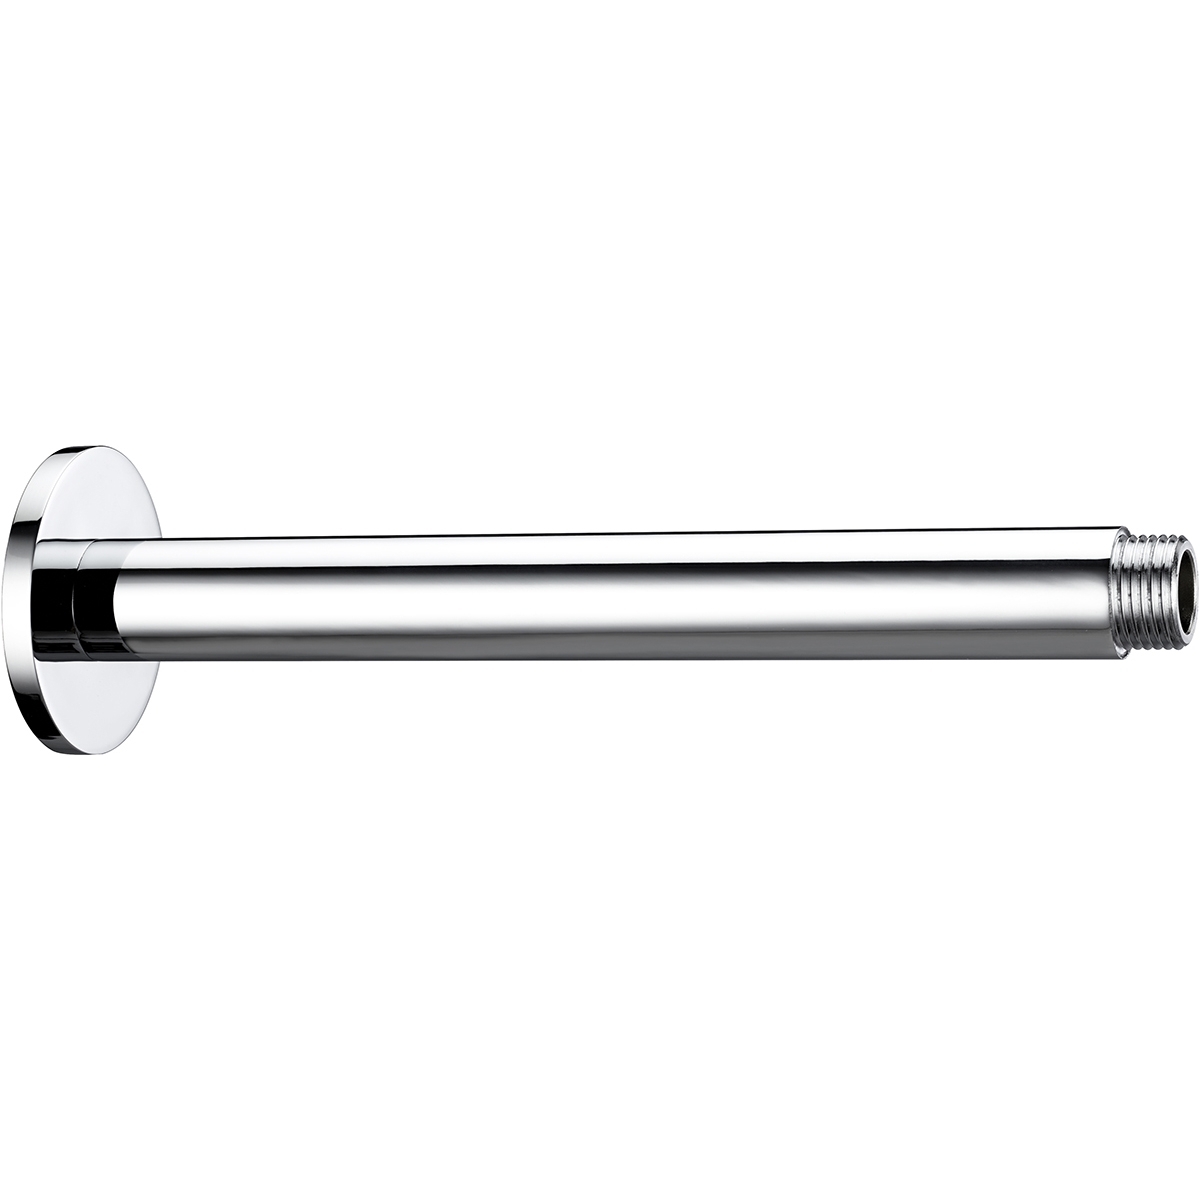 Bristan Round Ceiling Mounted Shower Arm, 200mm Length, Chrome 